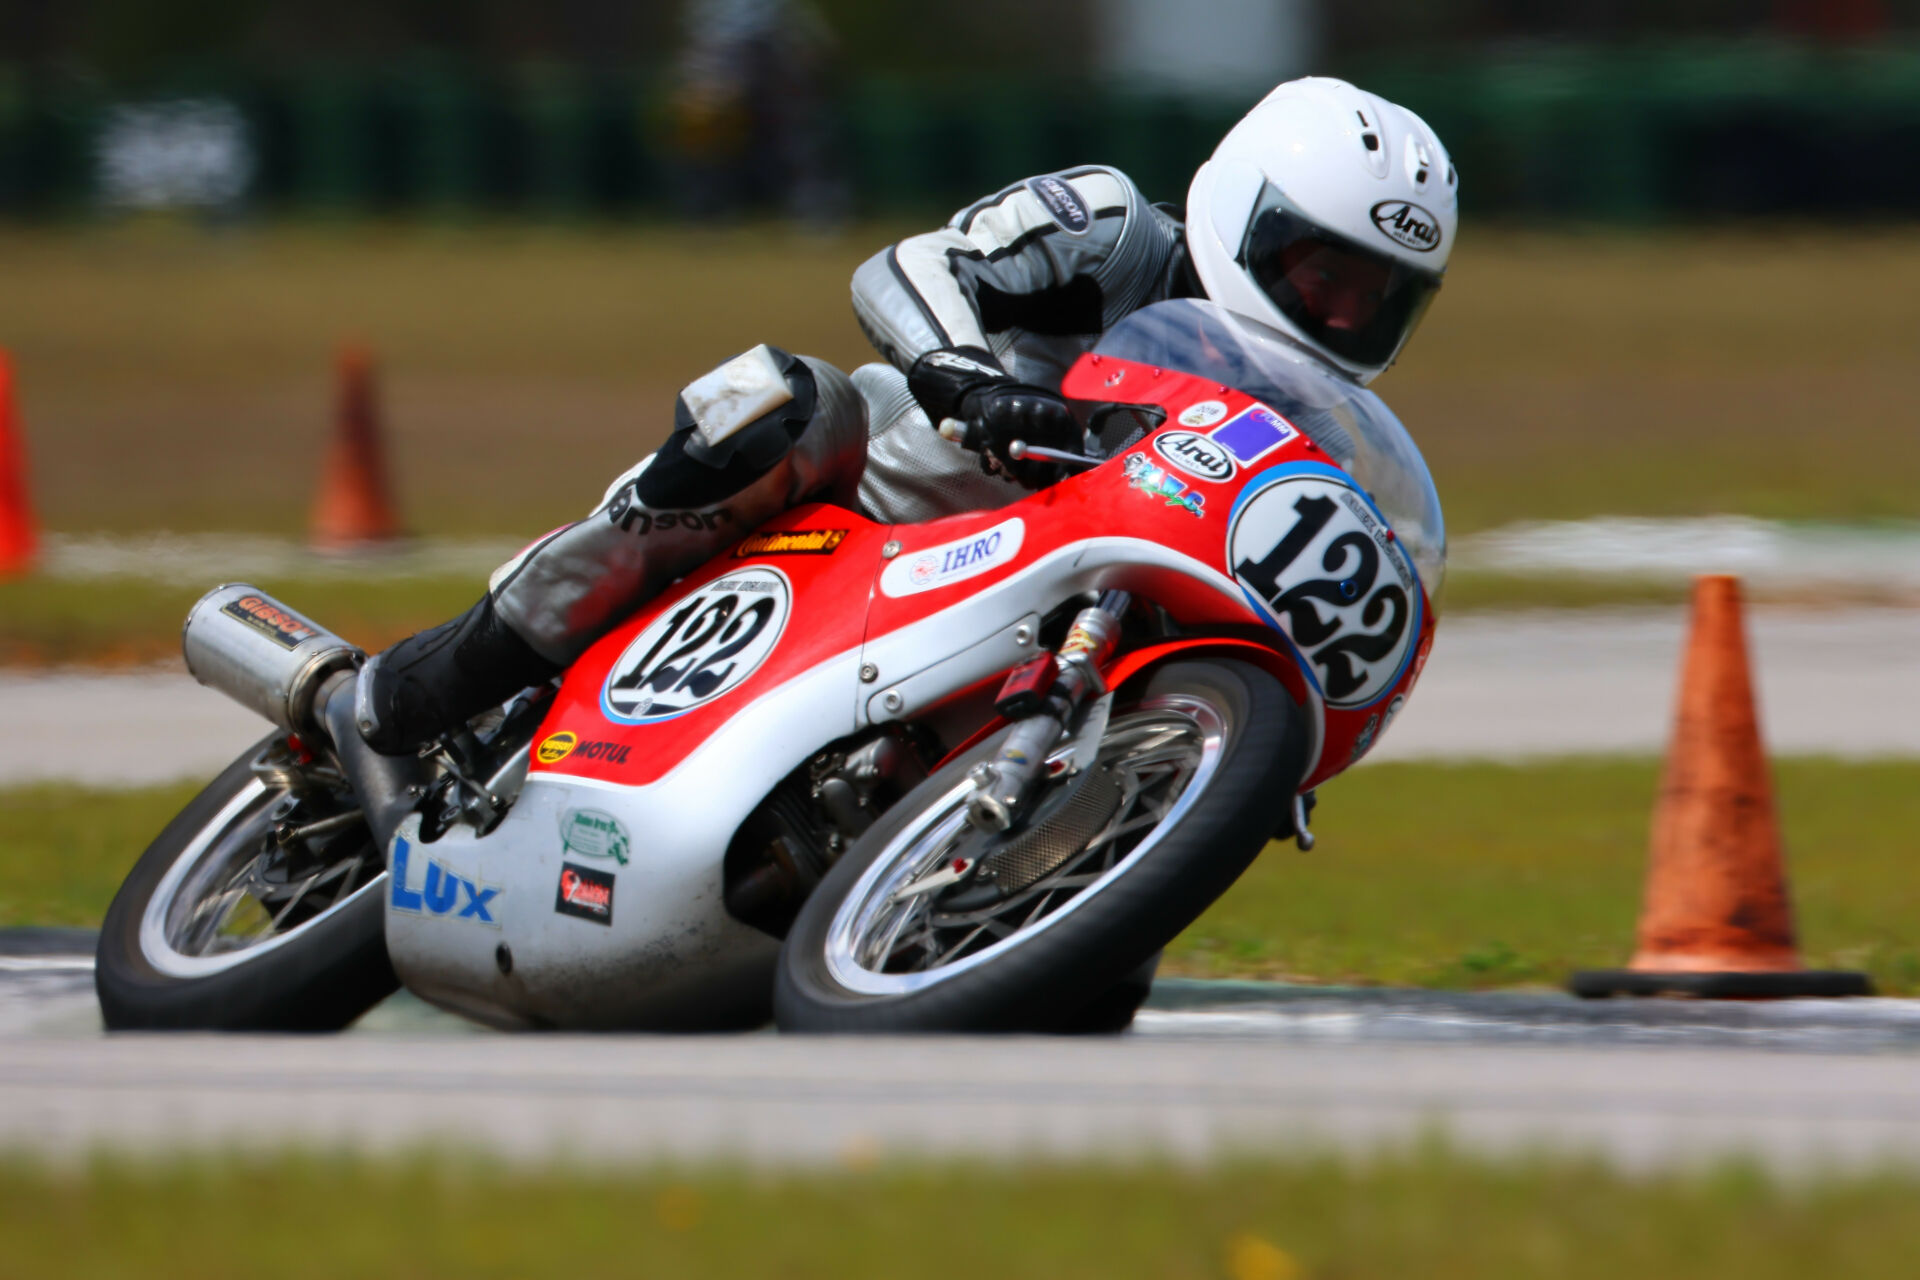 Alex McLean (122) won the inaugural Vintage Cup Championship featuring the 350GP class in 2019. Photo by etechphoto.com, courtesy AHRMA.